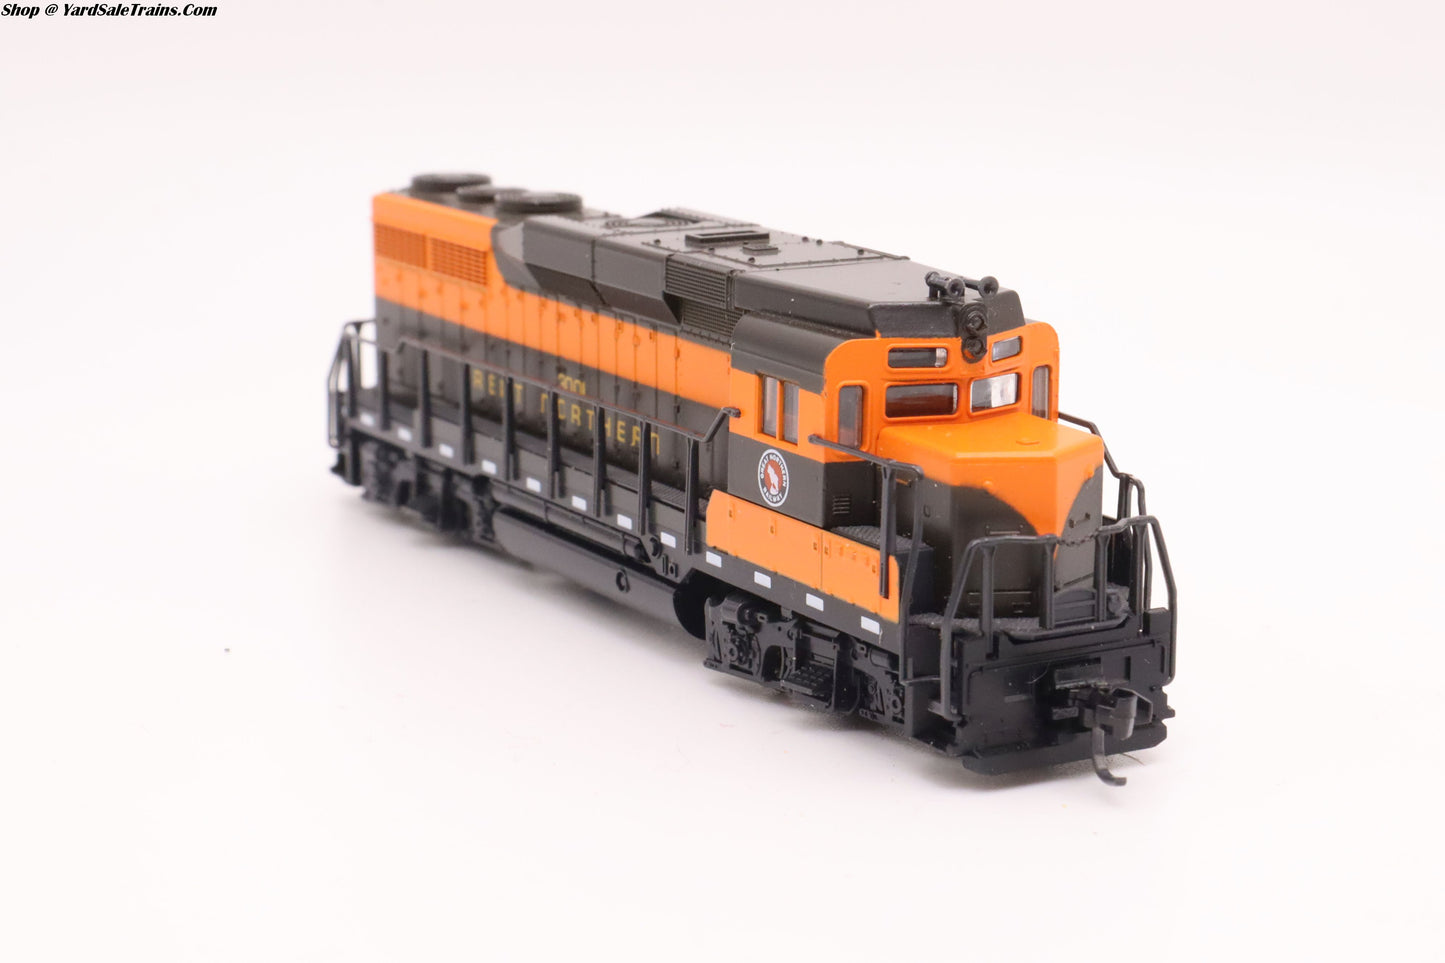 ATL-4730 - GP30 Great Northern - GN #3001 - Preowned